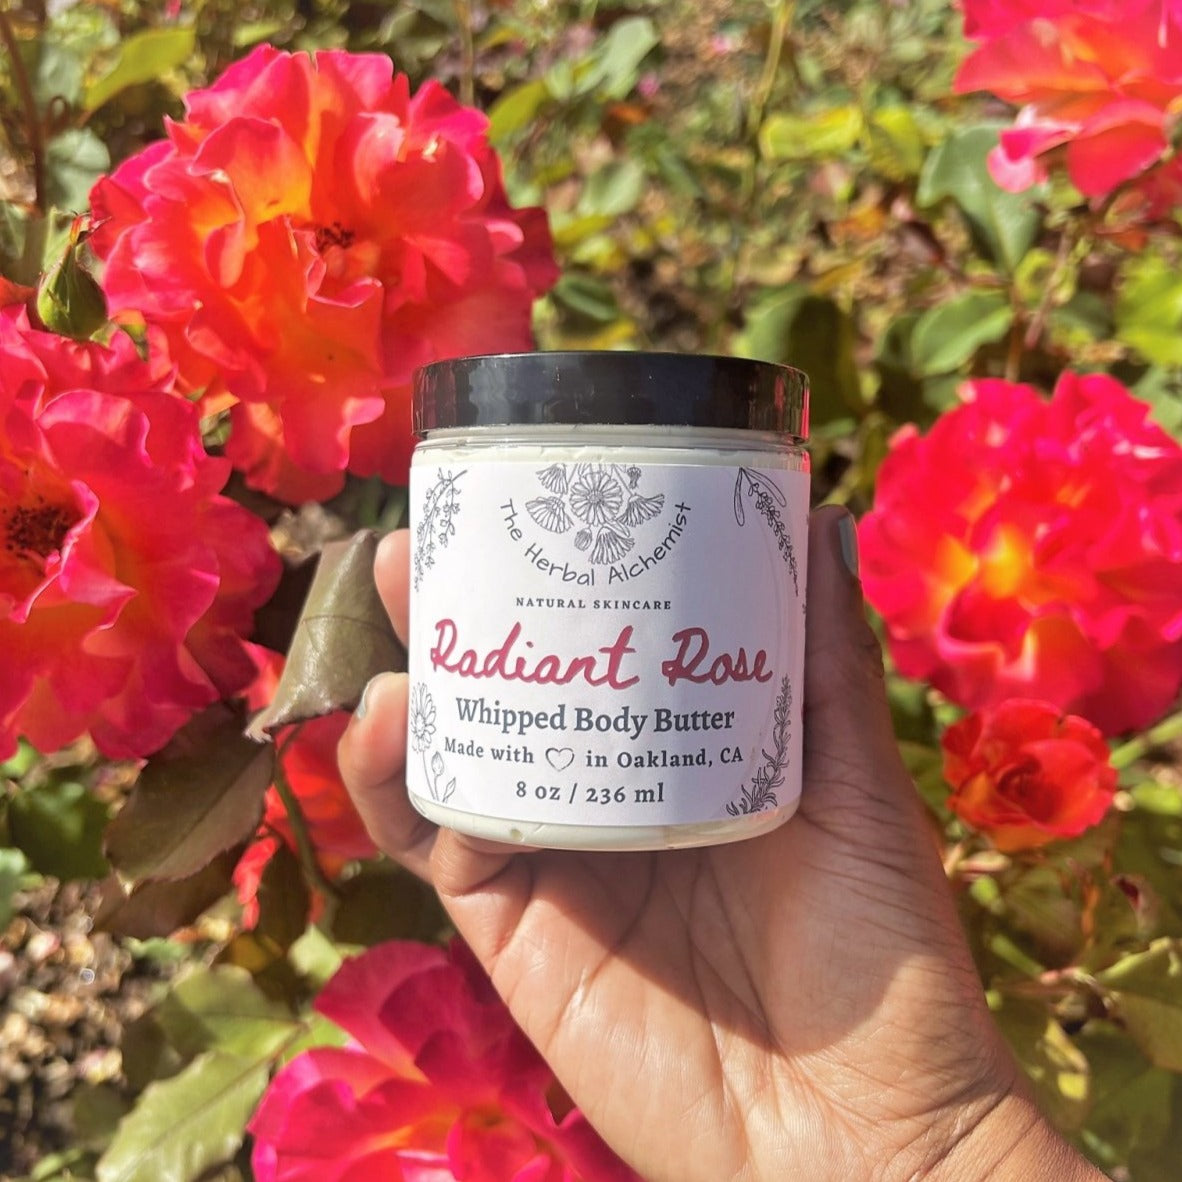 The creamiest whipped body butter body scents, rose body butter for deep moisturizing,  made with whipped shea butter for skin. It's the best body moisturizer for skin